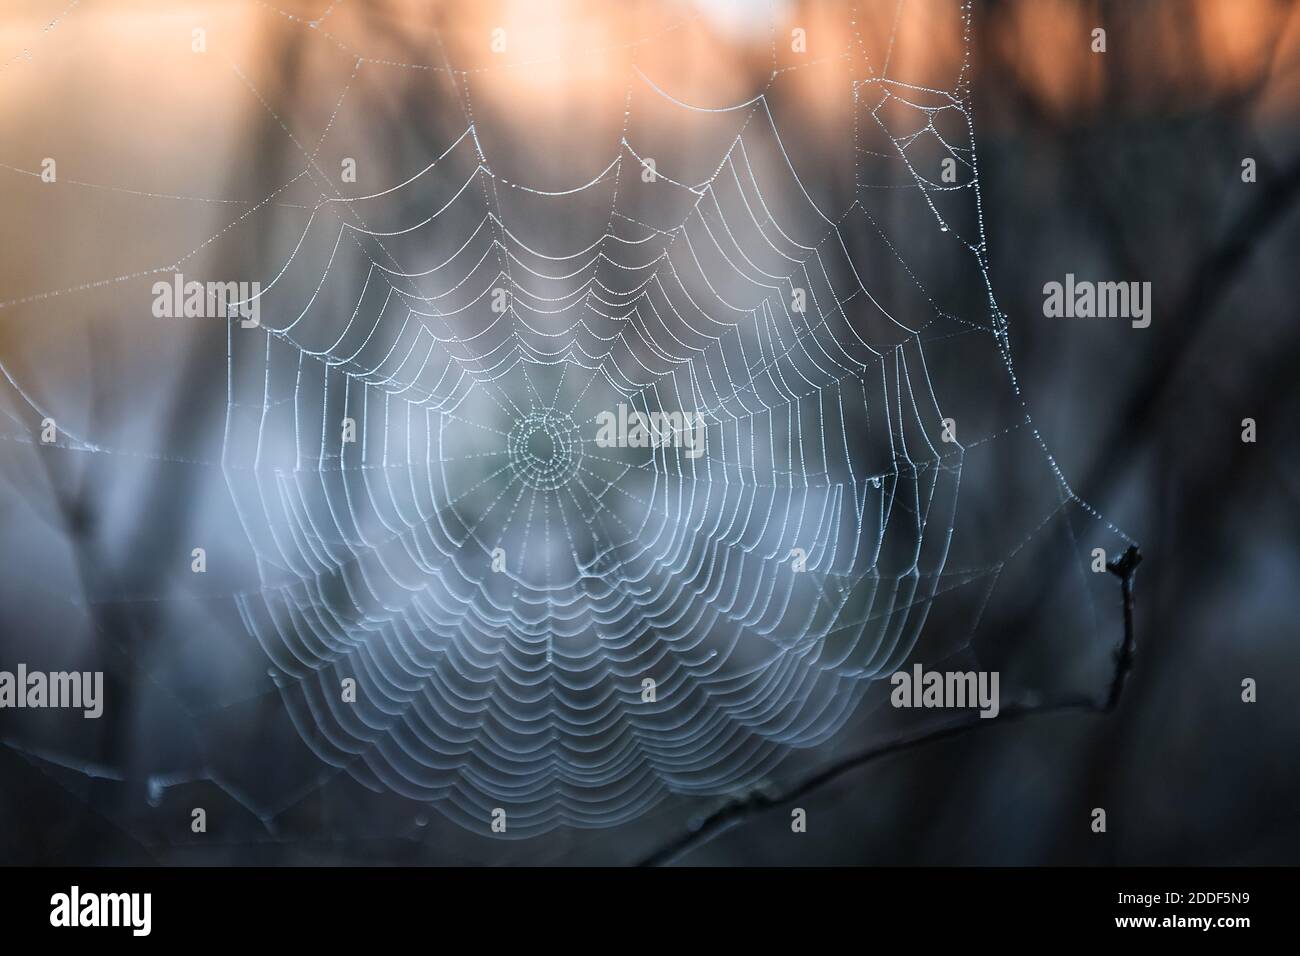 spider web in back light Stock Photo